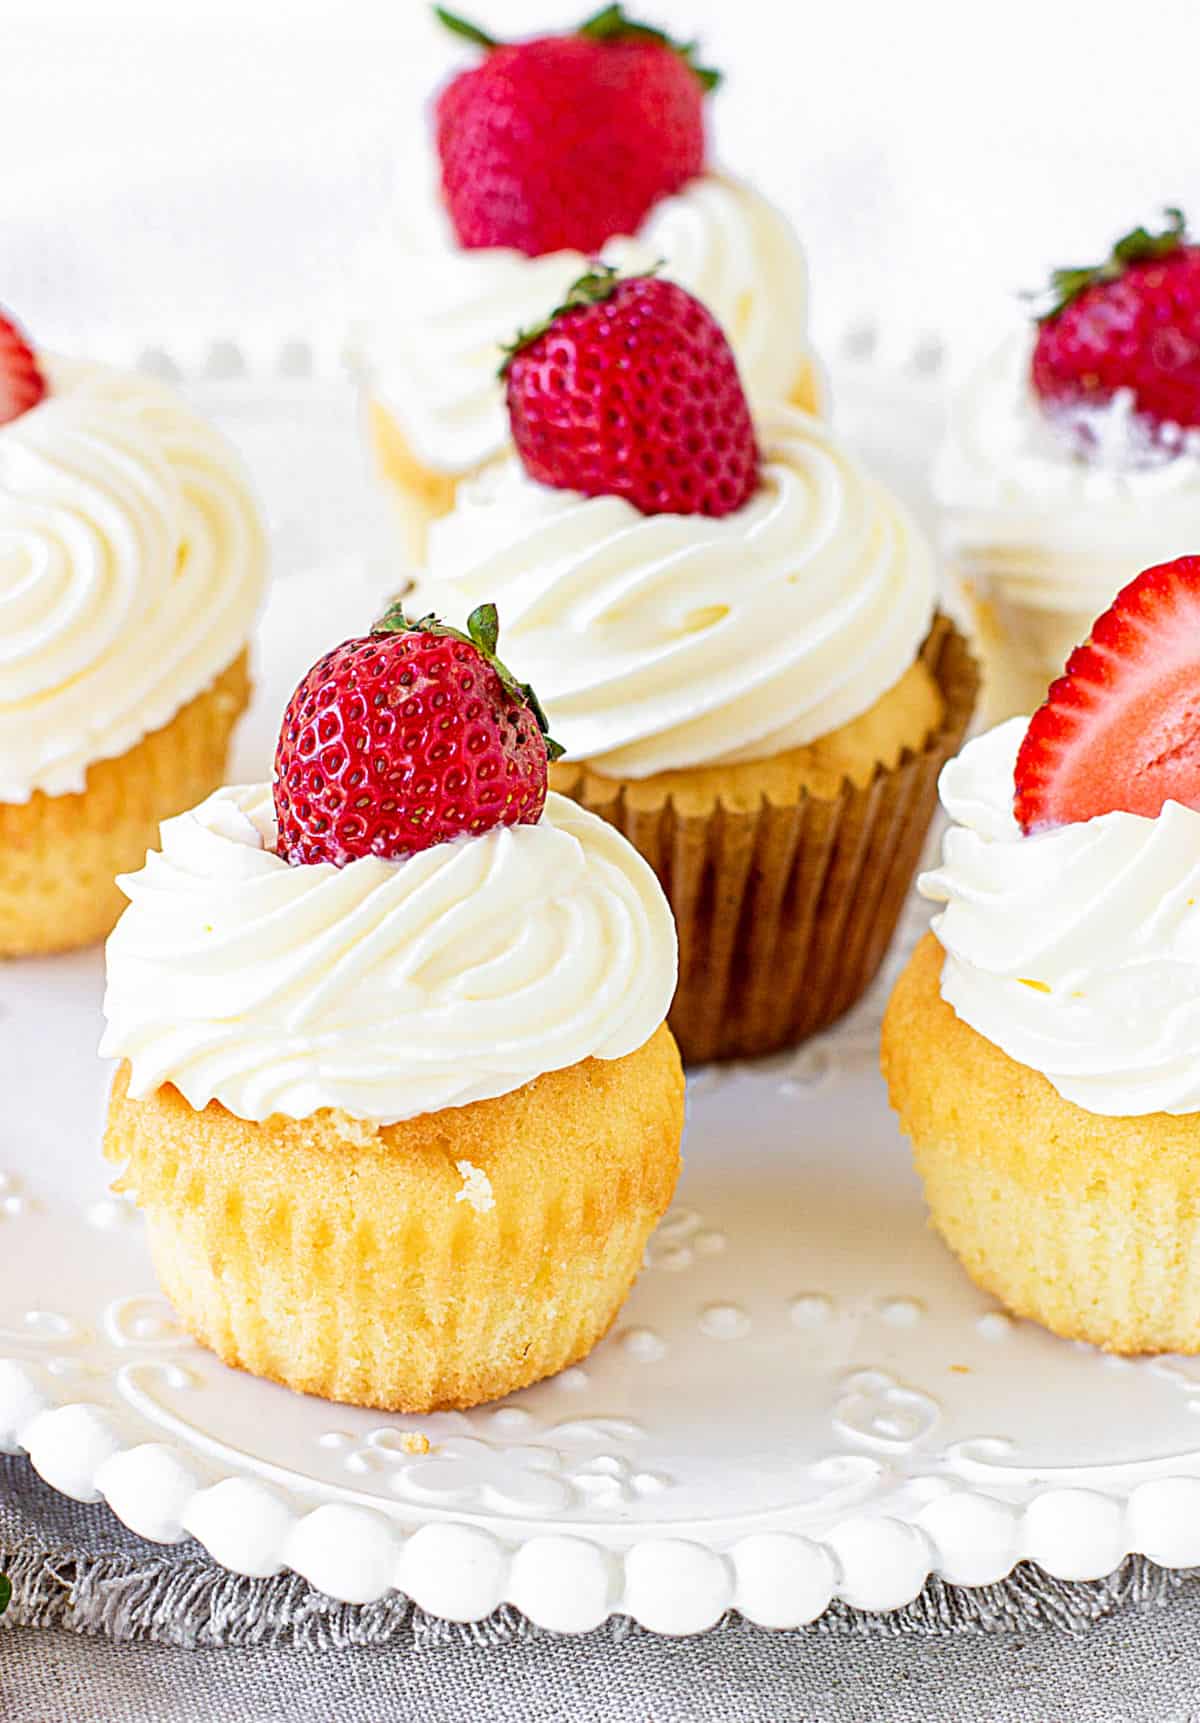 White plate with several cream and strawberry topped vanilla cupcakes.